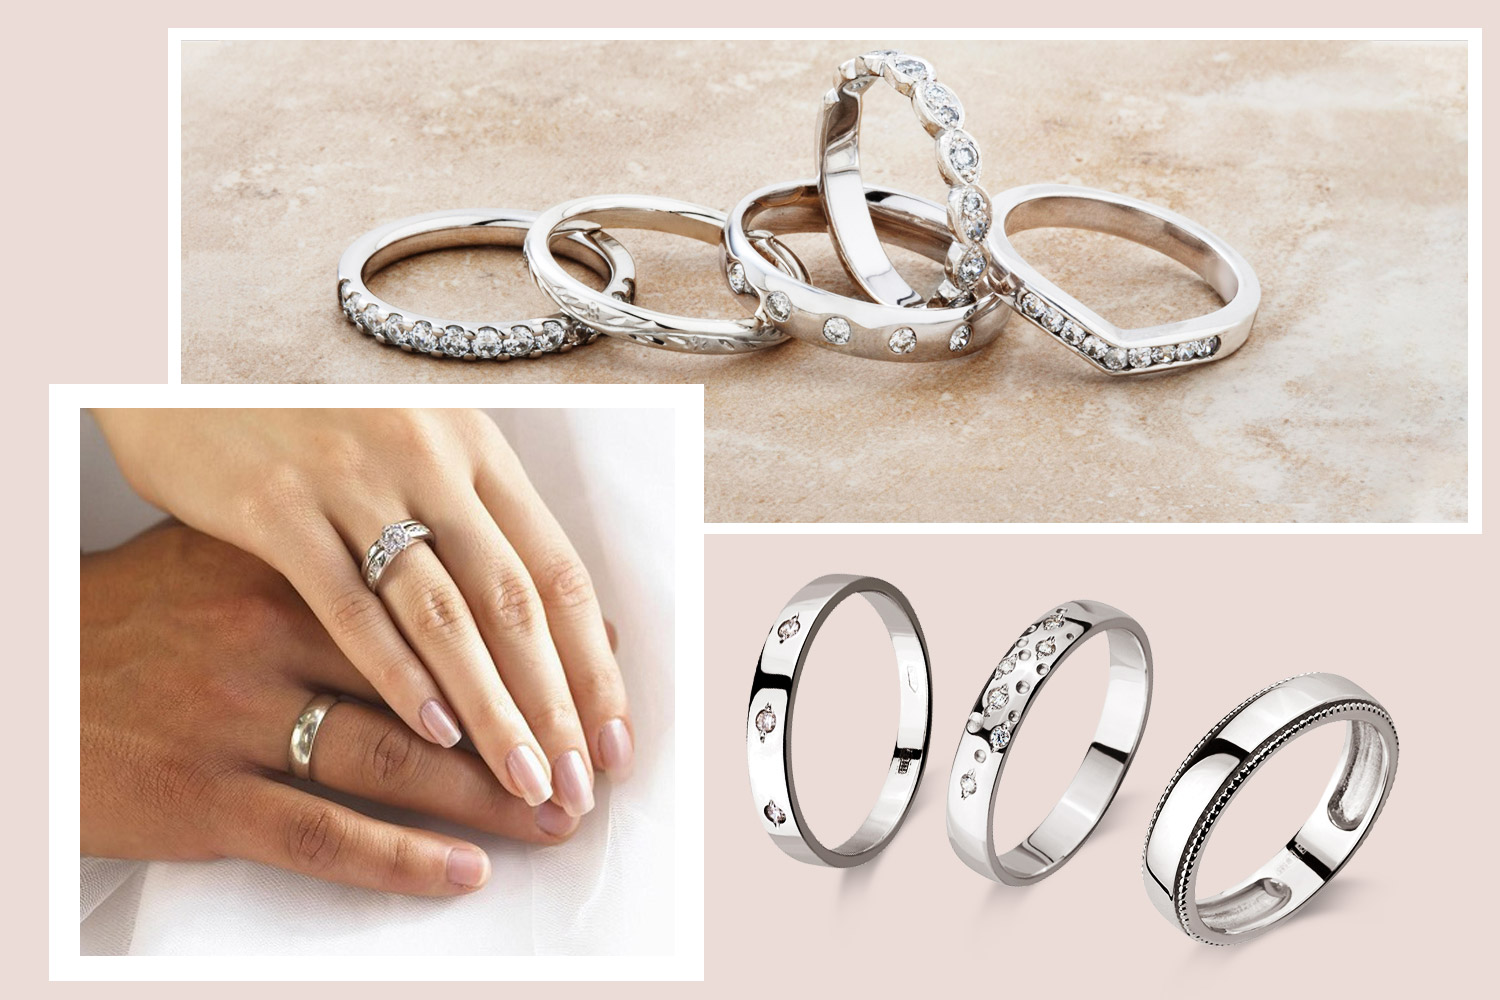 The best combination of wedding rings